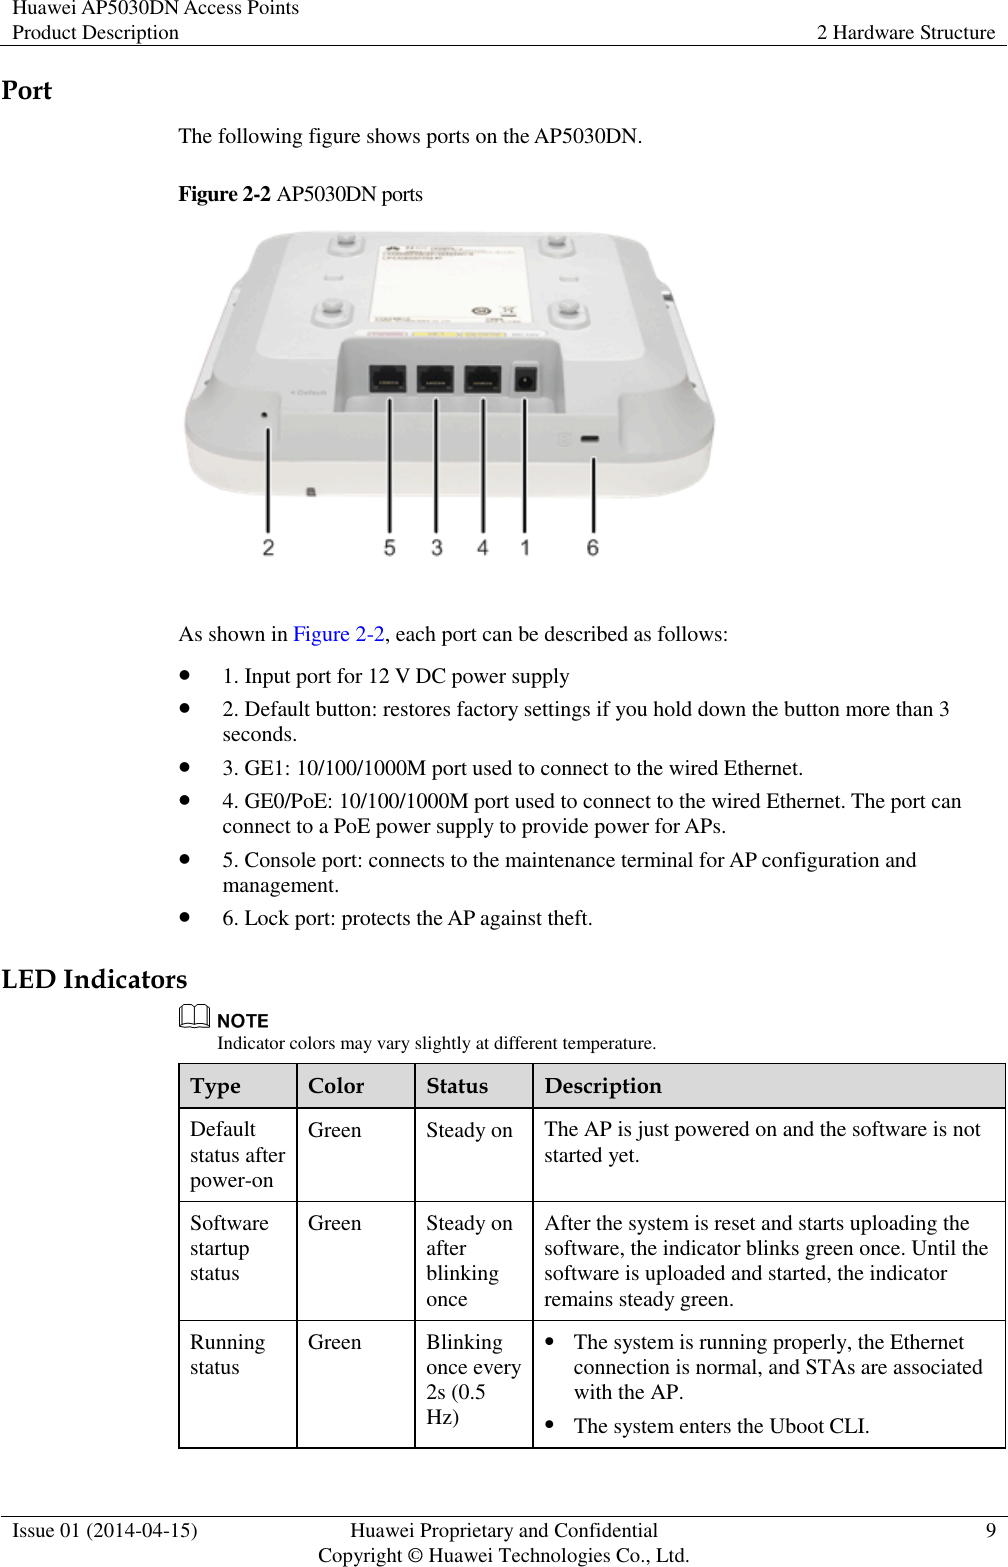 Huawei AP5030DN Access Points Product Description 2 Hardware Structure  Issue 01 (2014-04-15) Huawei Proprietary and Confidential                                     Copyright © Huawei Technologies Co., Ltd. 9  Port The following figure shows ports on the AP5030DN. Figure 2-2 AP5030DN ports   As shown in Figure 2-2, each port can be described as follows:  1. Input port for 12 V DC power supply  2. Default button: restores factory settings if you hold down the button more than 3 seconds.  3. GE1: 10/100/1000M port used to connect to the wired Ethernet.  4. GE0/PoE: 10/100/1000M port used to connect to the wired Ethernet. The port can connect to a PoE power supply to provide power for APs.  5. Console port: connects to the maintenance terminal for AP configuration and management.  6. Lock port: protects the AP against theft. LED Indicators  Indicator colors may vary slightly at different temperature. Type Color Status Description Default status after power-on Green Steady on The AP is just powered on and the software is not started yet. Software startup status Green Steady on after blinking once After the system is reset and starts uploading the software, the indicator blinks green once. Until the software is uploaded and started, the indicator remains steady green. Running status Green Blinking once every 2s (0.5 Hz)  The system is running properly, the Ethernet connection is normal, and STAs are associated with the AP.  The system enters the Uboot CLI. 